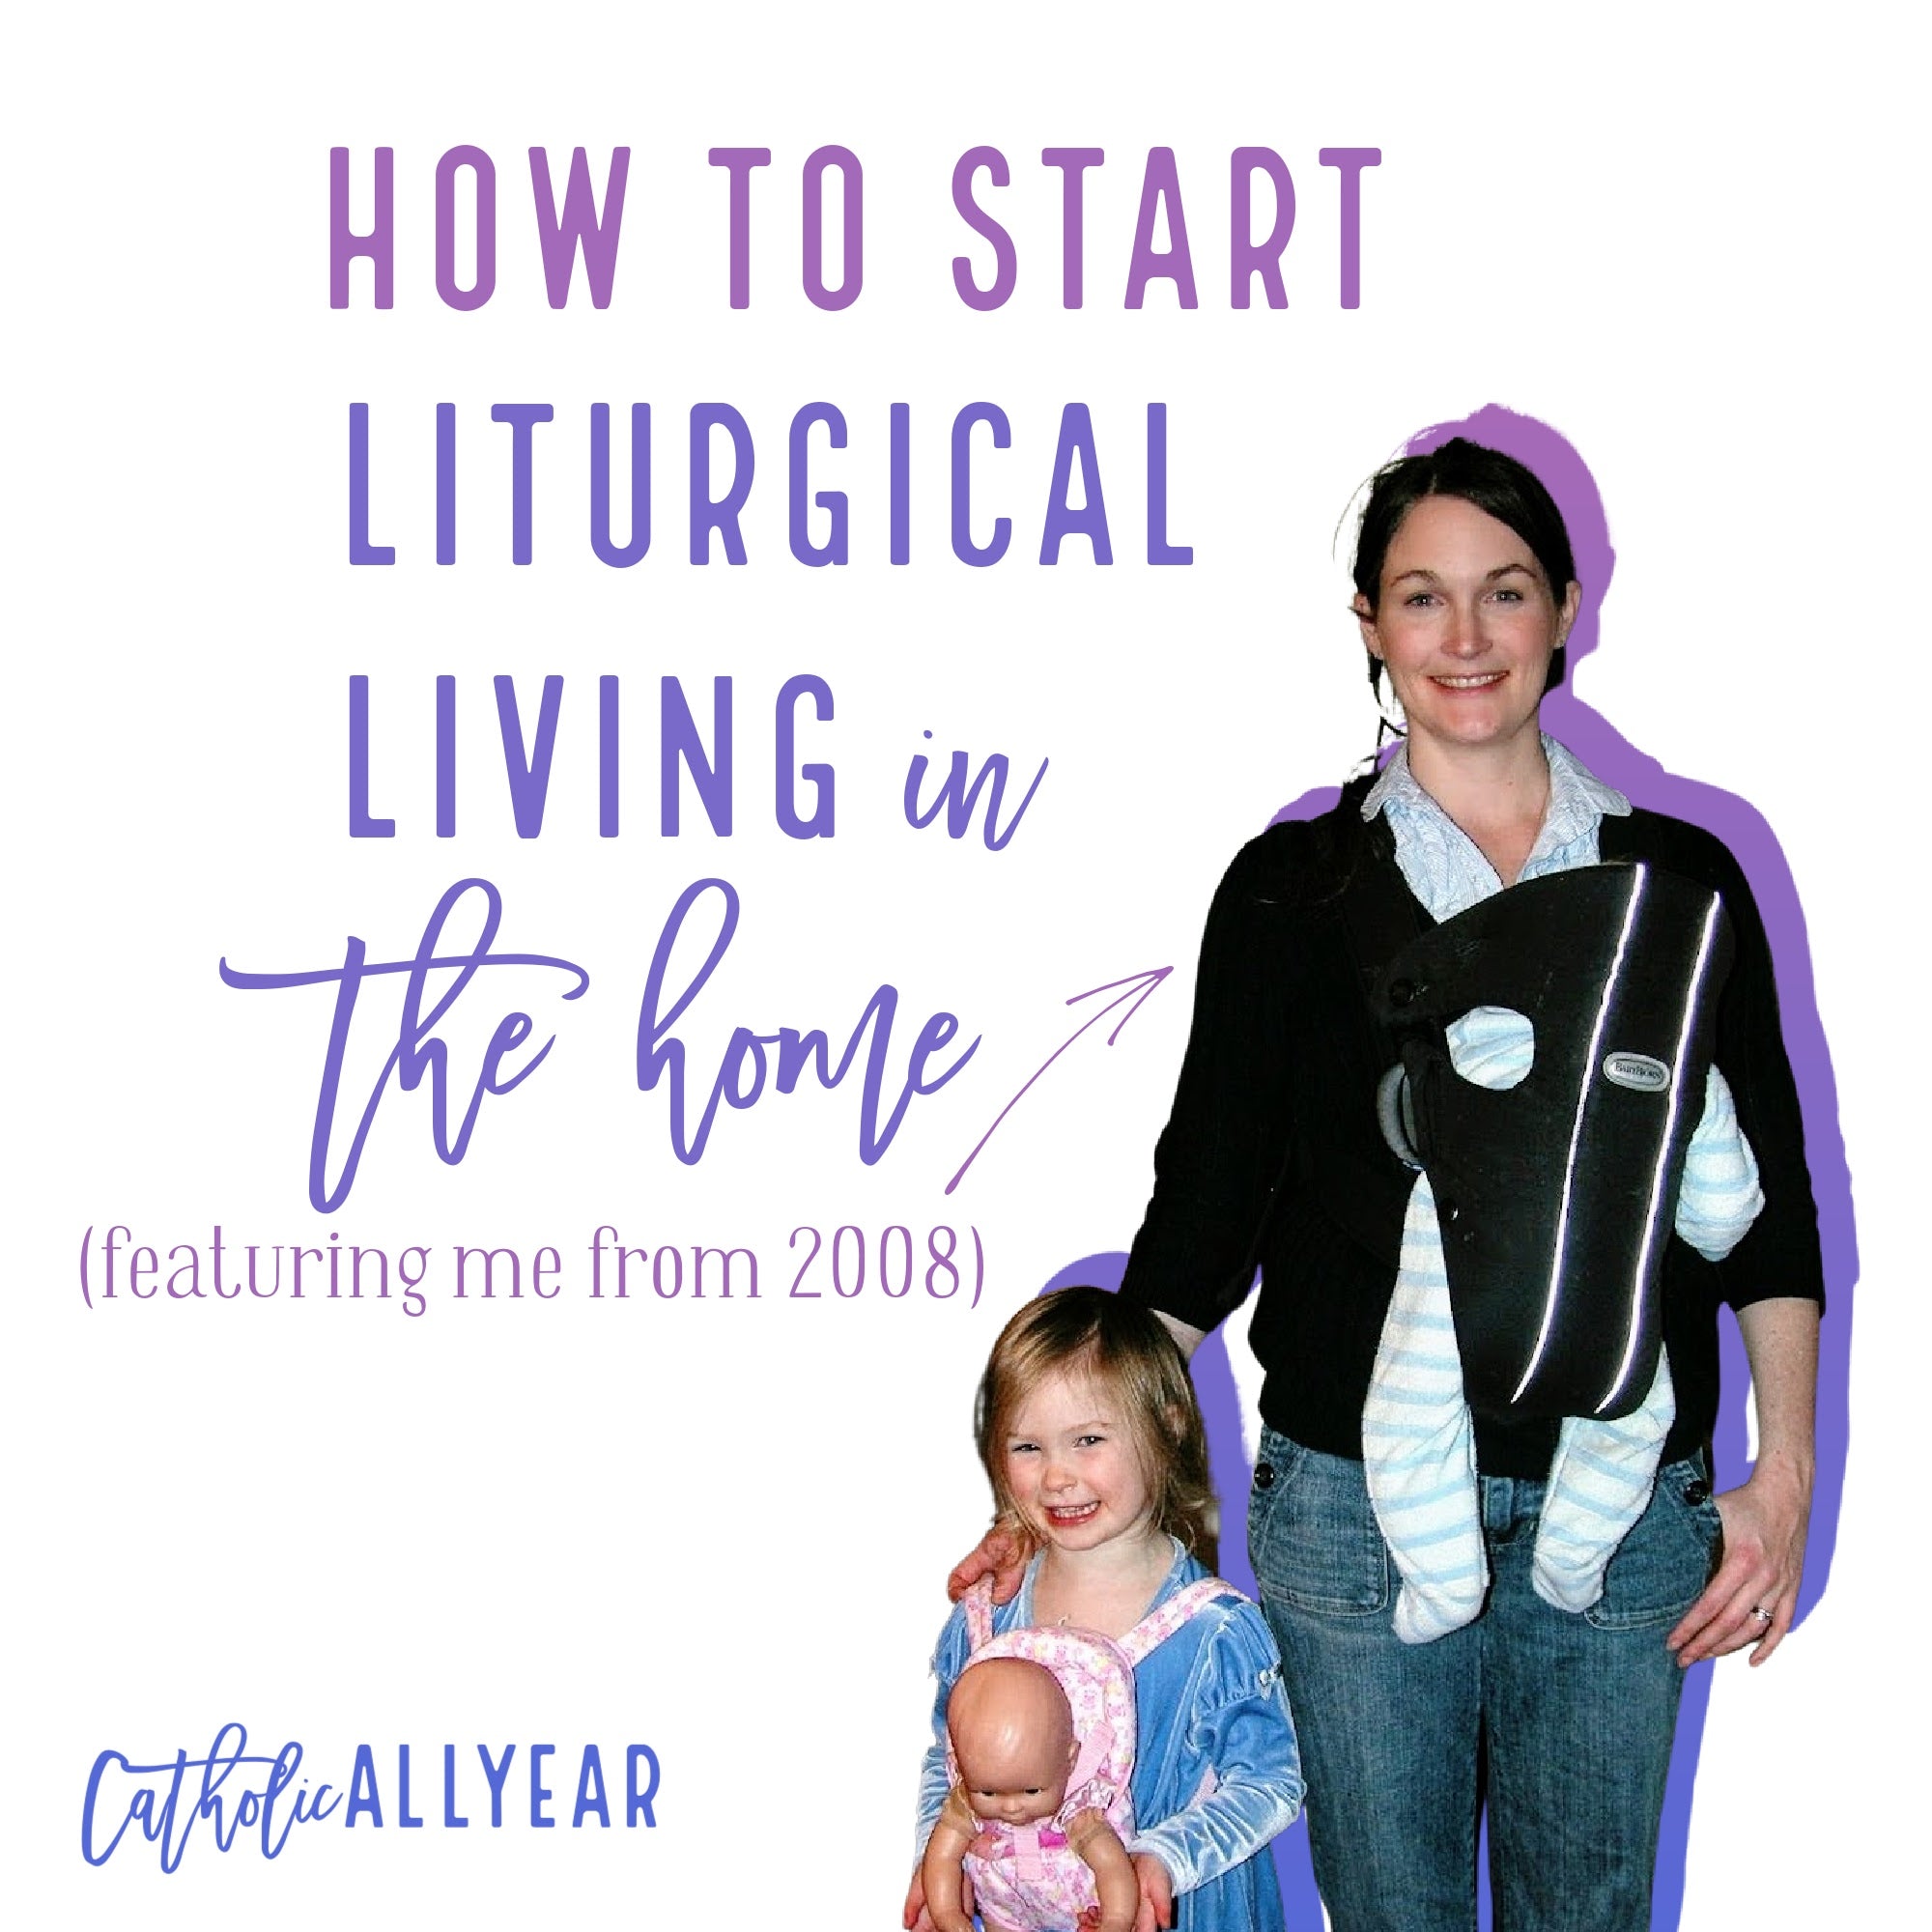 How To Start Liturgical Living in the Home (with help from me in 2008)